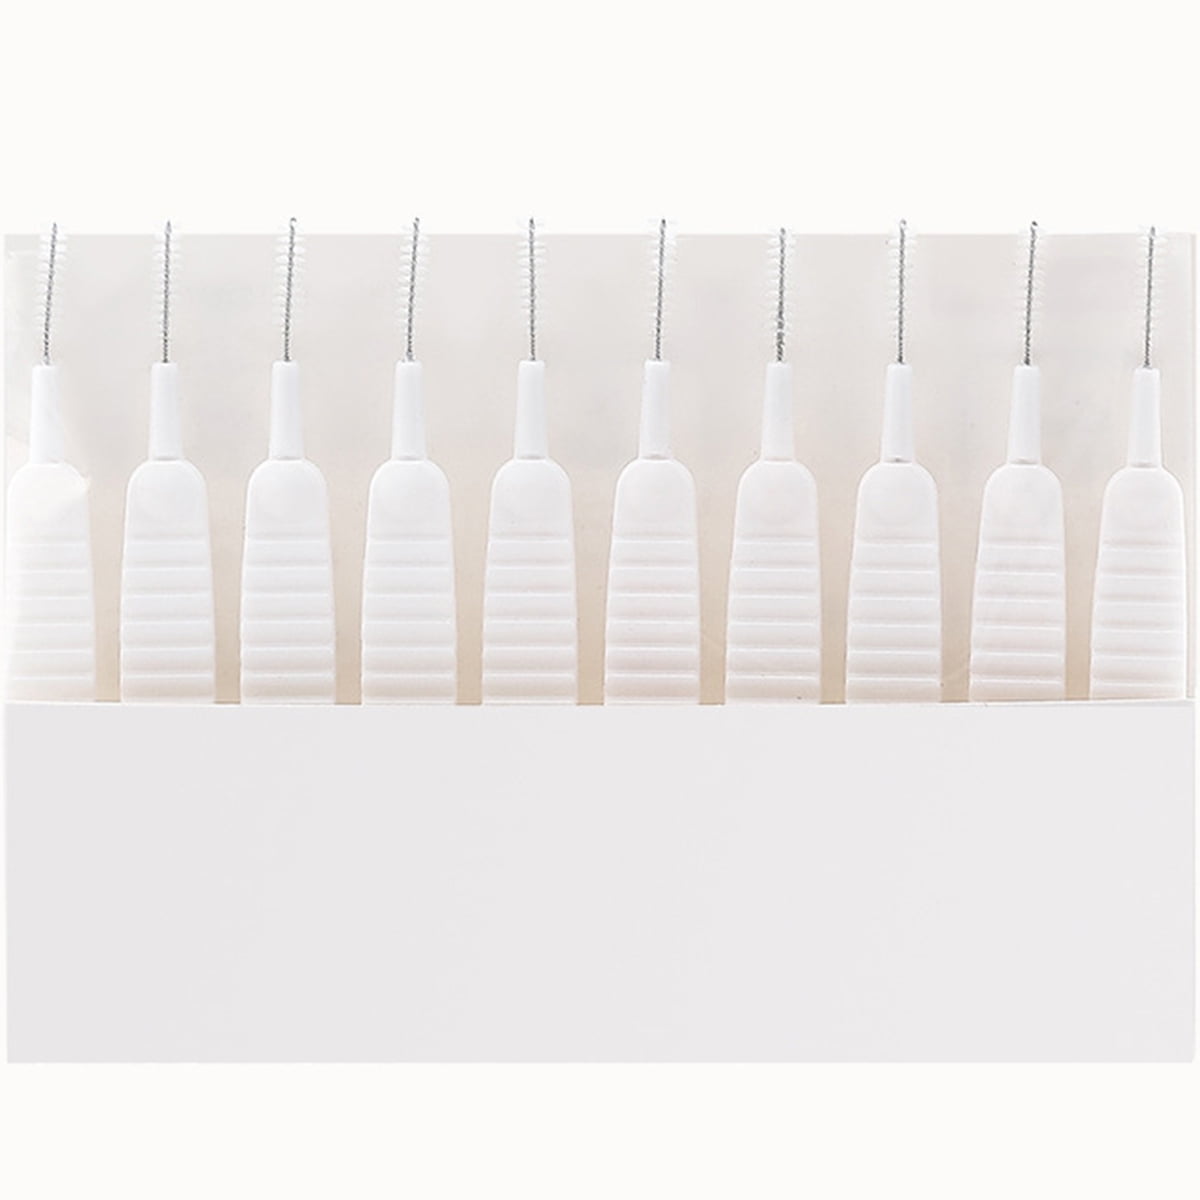 Austok 10pcs Shower Head Cleaning Brush Nylon Small Hole Cleaner Reusable Anti-Clogging Brush Cleaner Tool for Shower Nozzle Holes Mobile Phone Holes